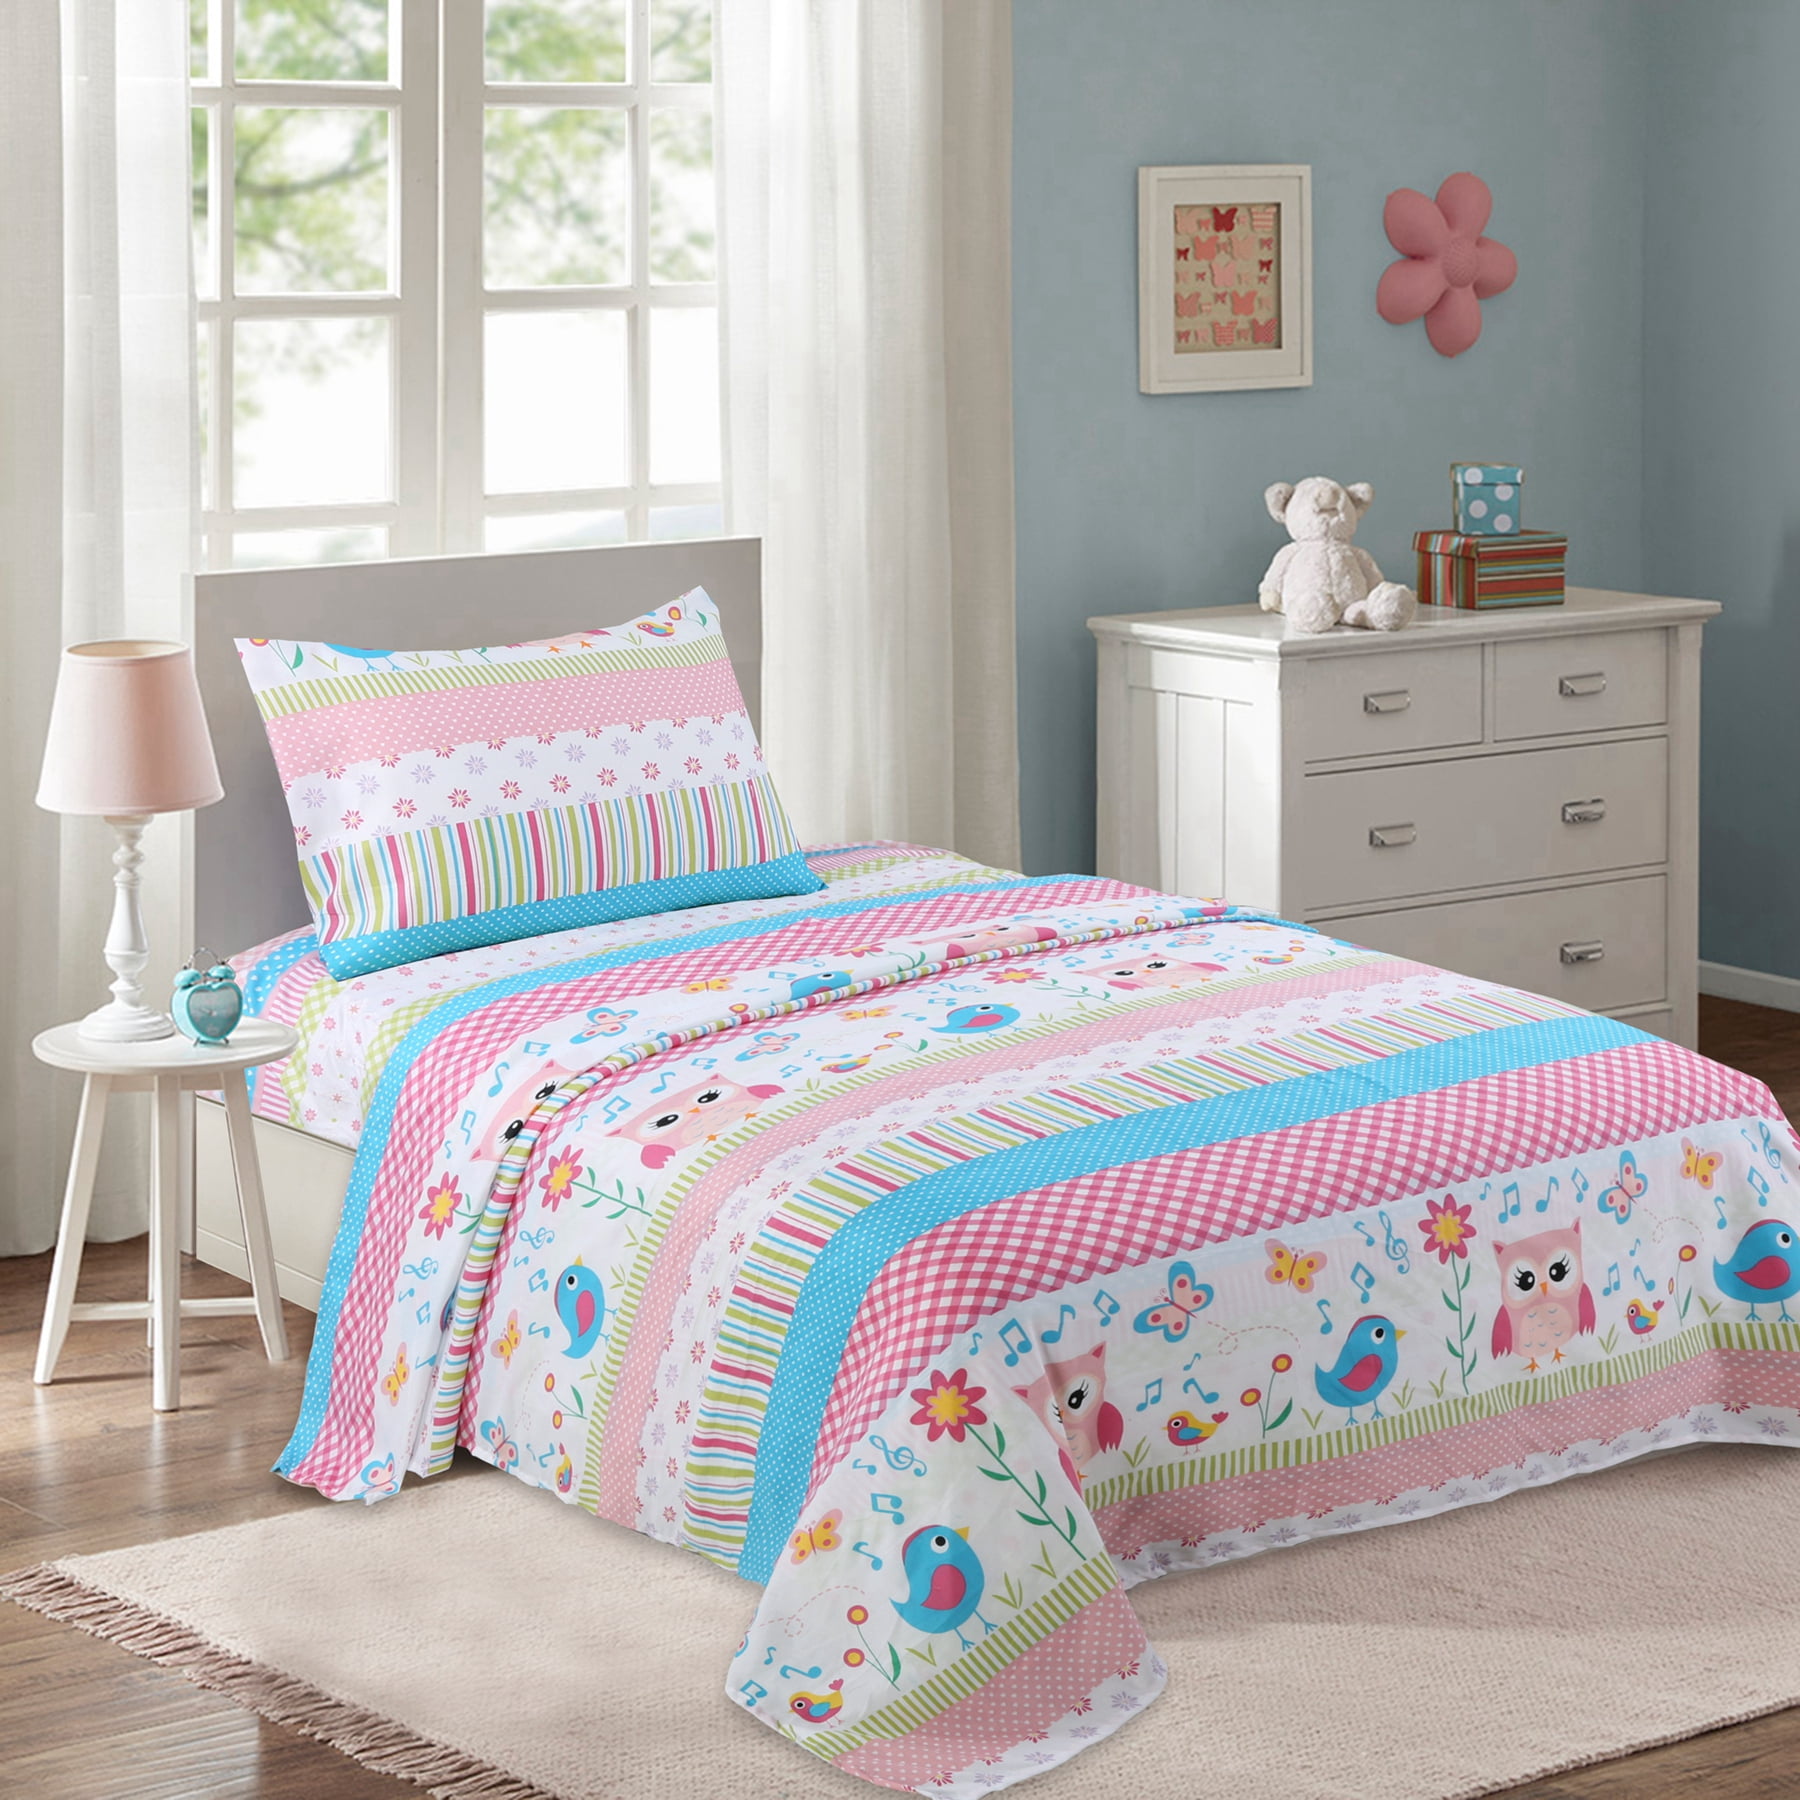 MarCielo Bed Sheets for Kids Twin Sheets for Kids Girls ...